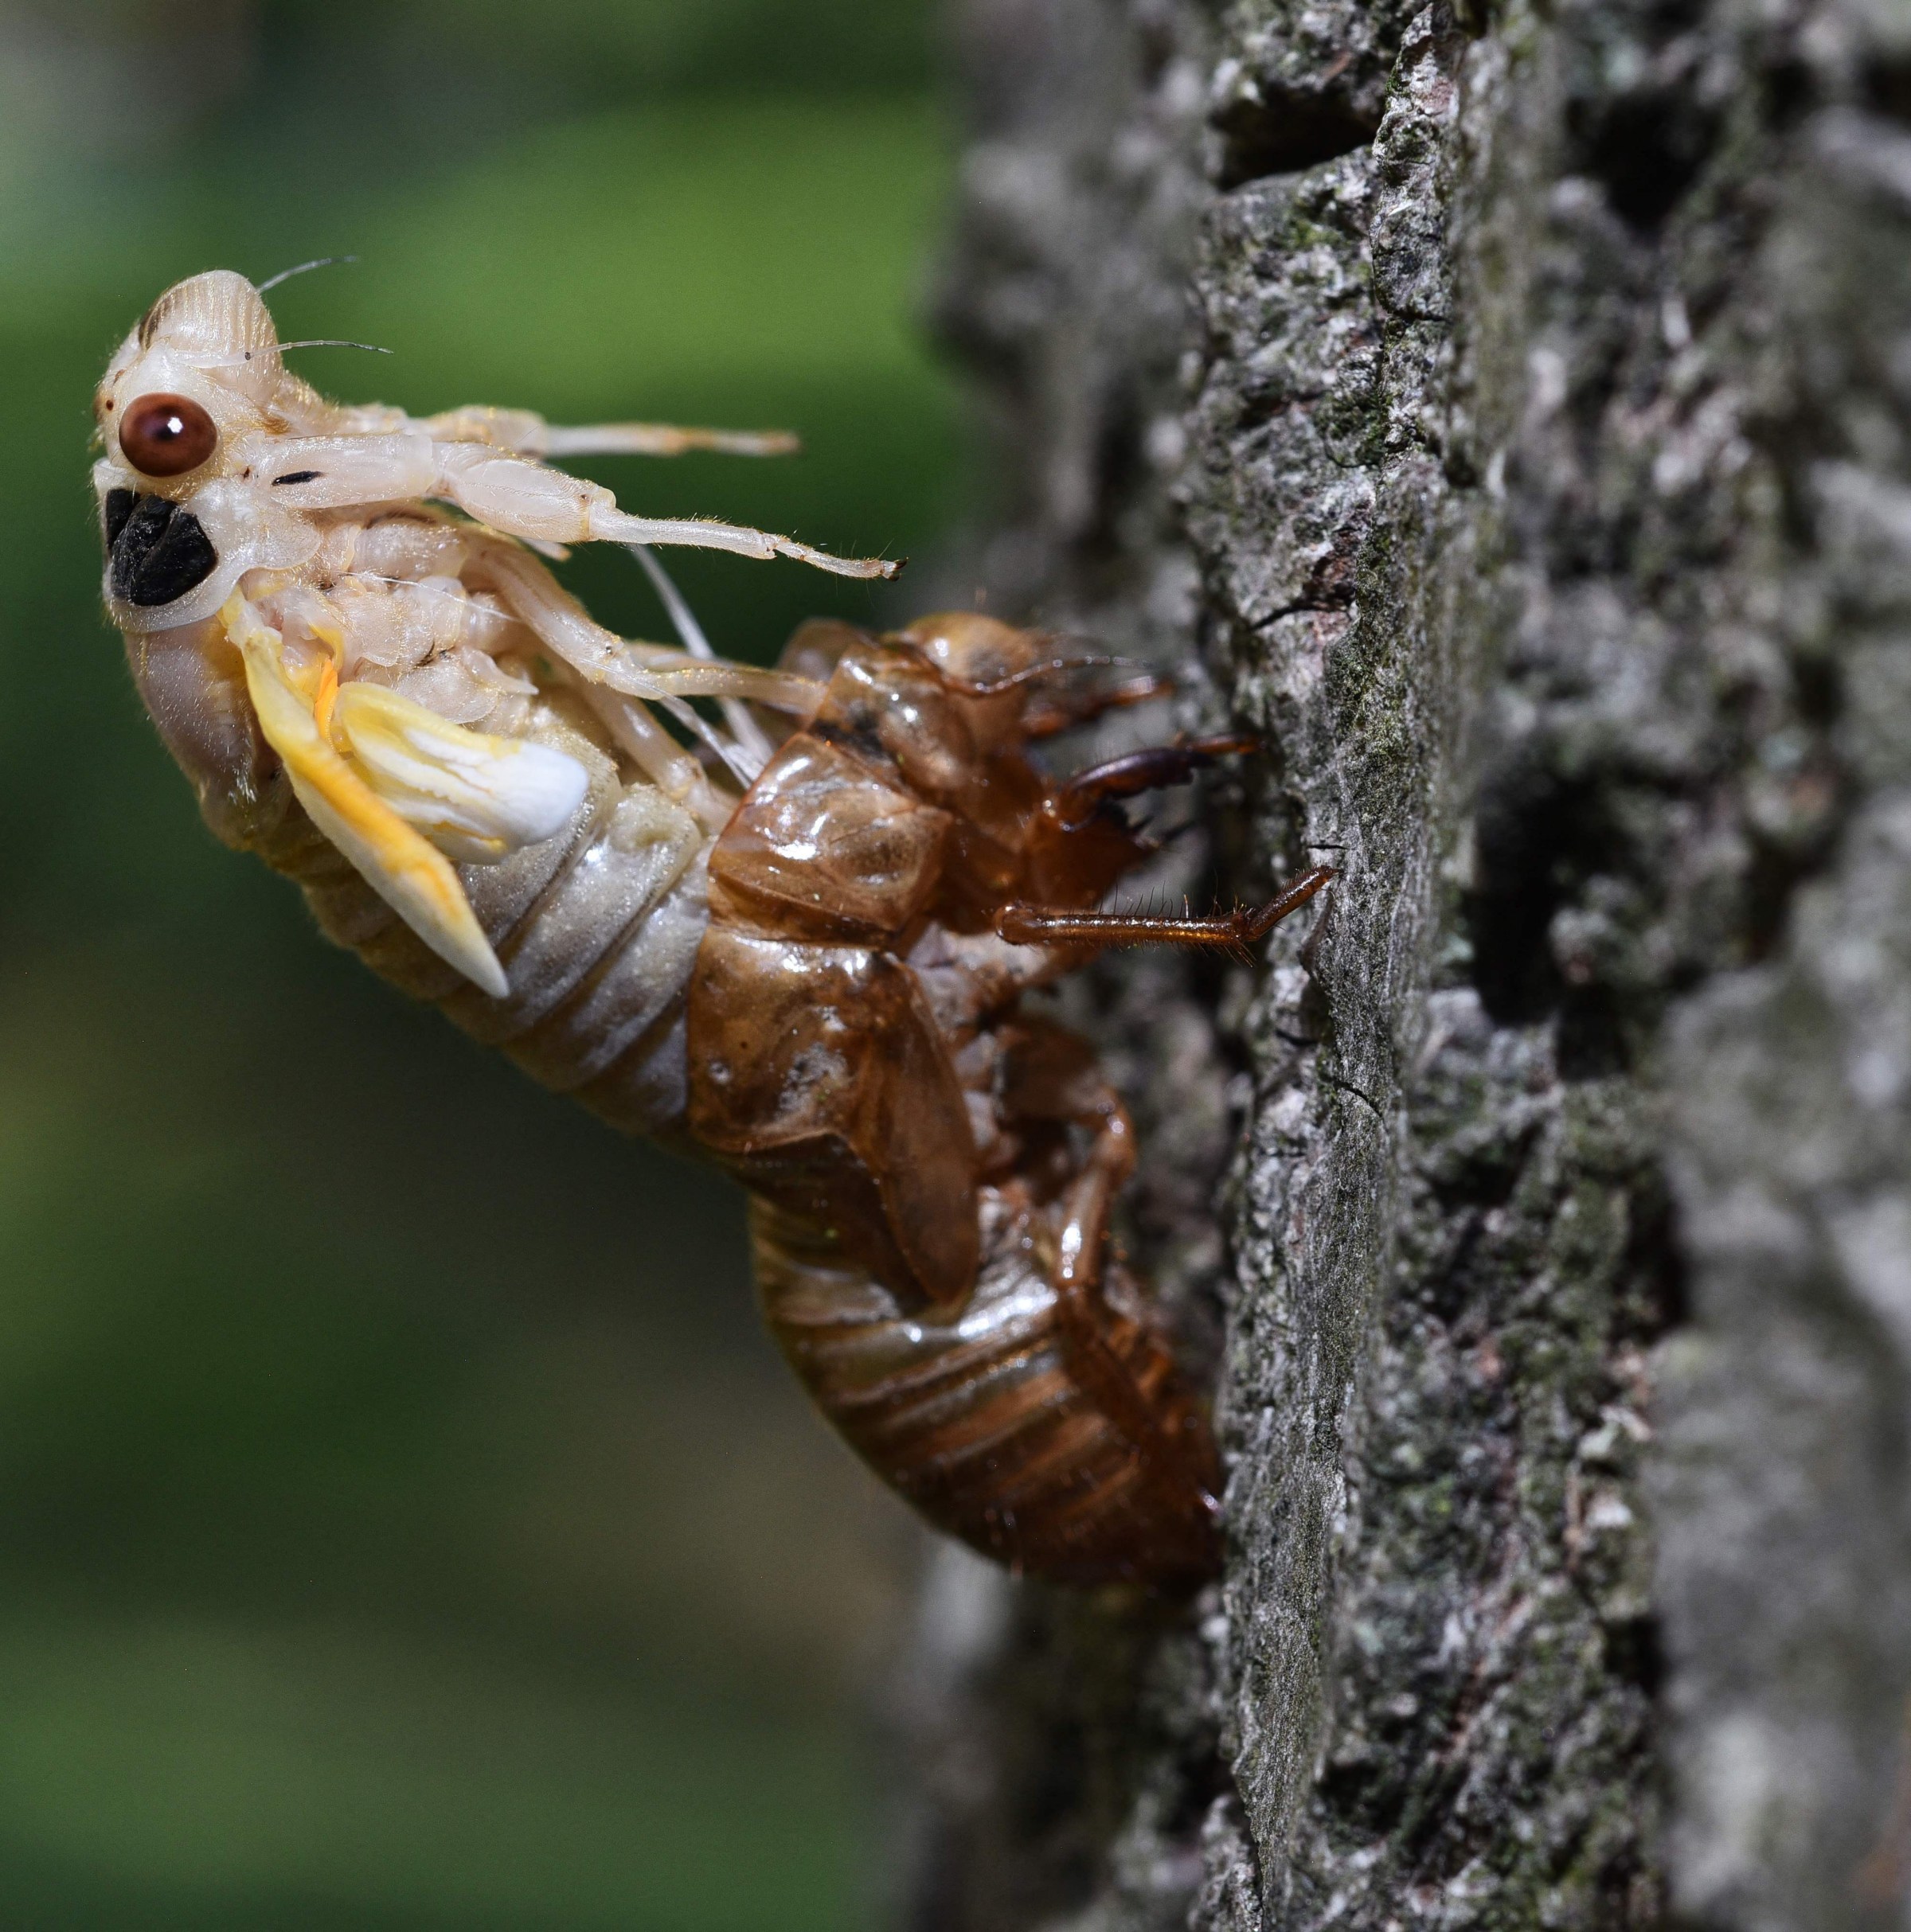 Watch Sir David Attenborough seduce a cicada with the snap of his fingers